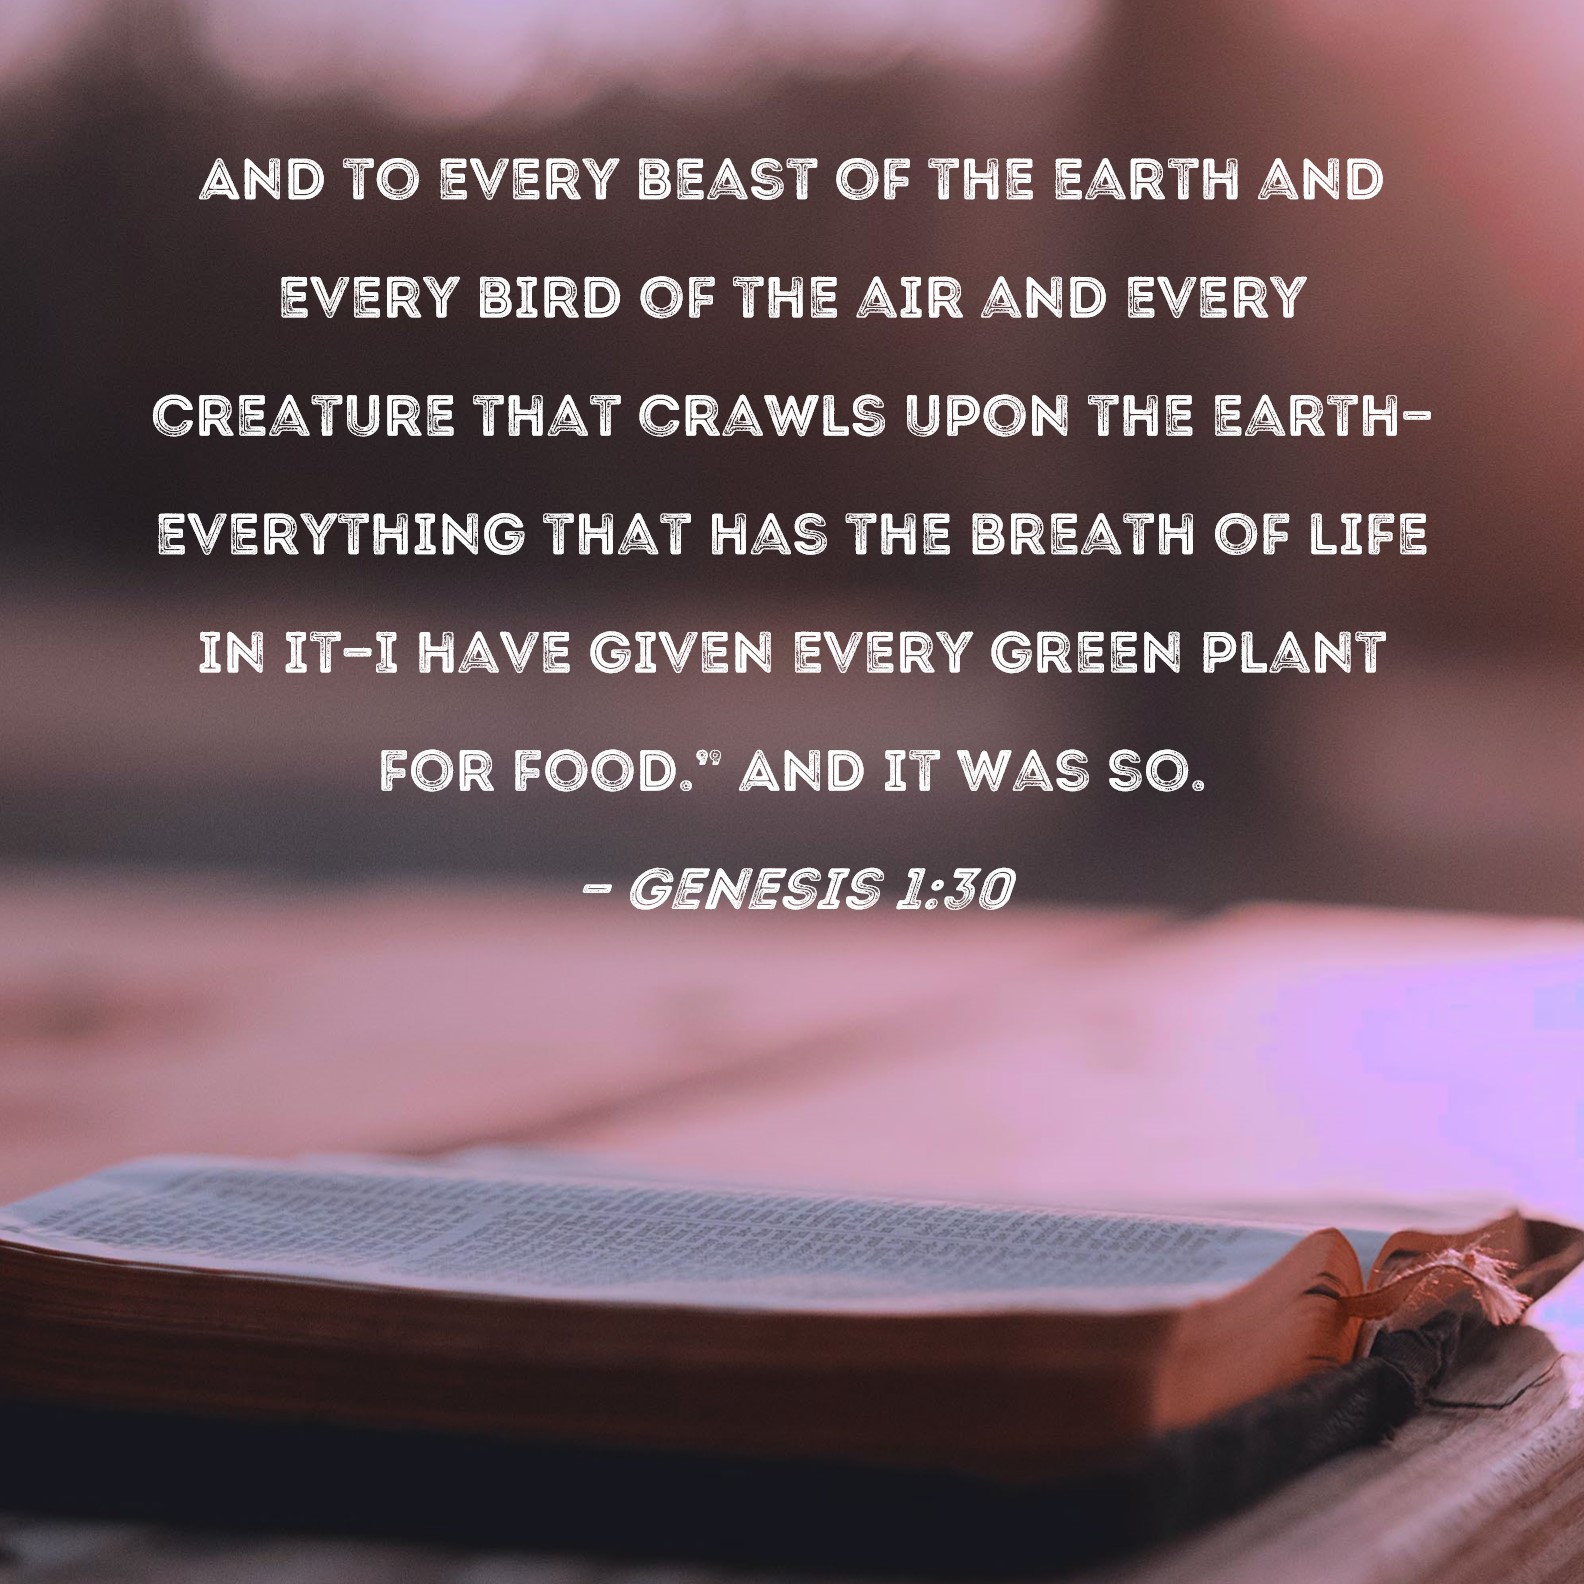 Every moving thing that liveth shall be meat for you': an exposition on Genesis  9:3